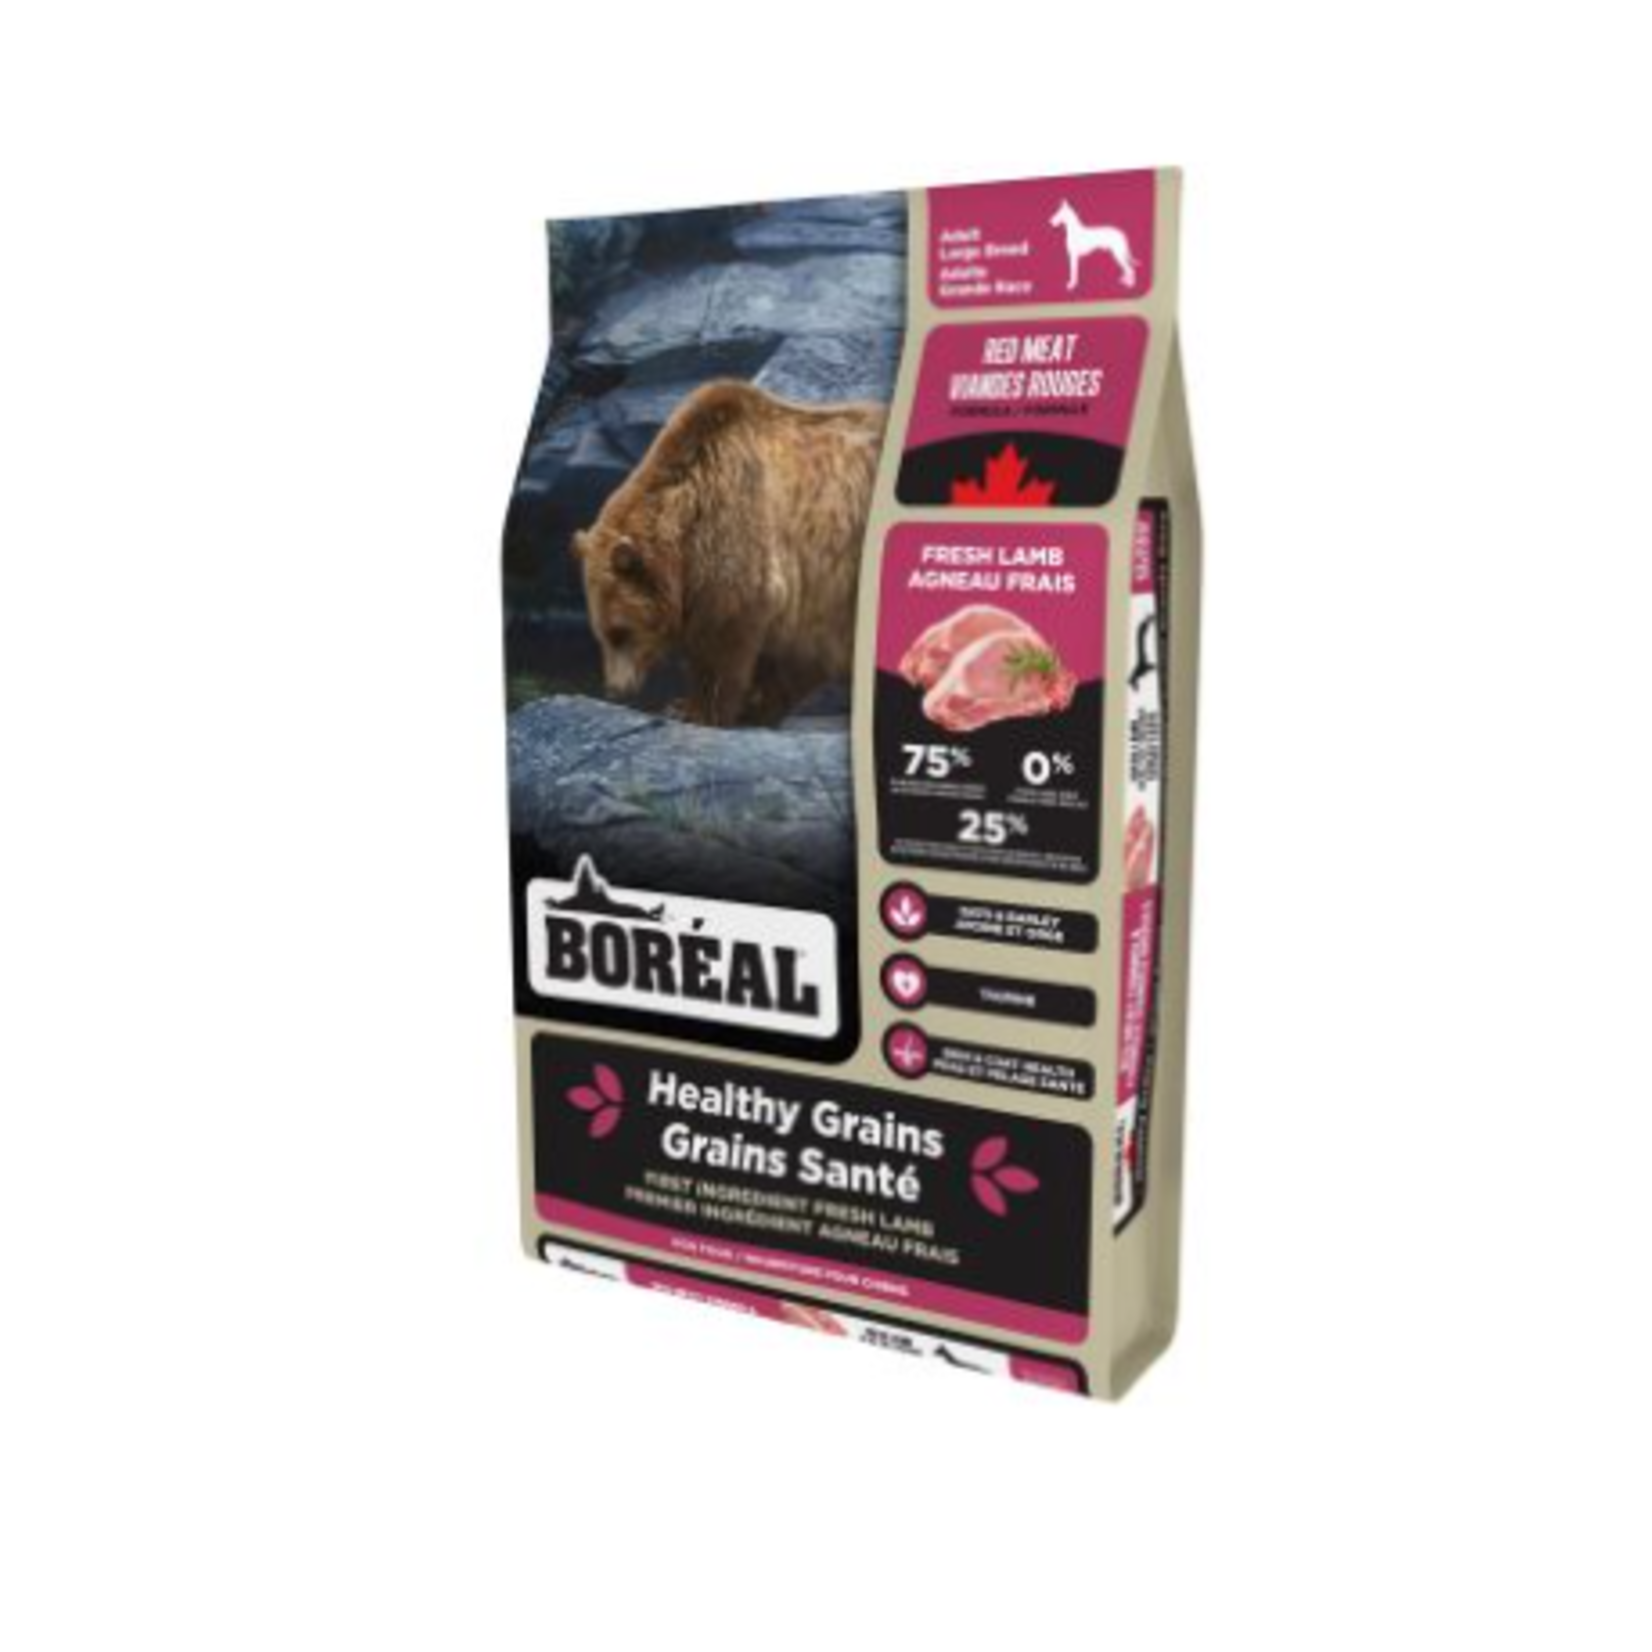 Boréal Healthy Grains - Large Breed - Red Meat - 30 lbs